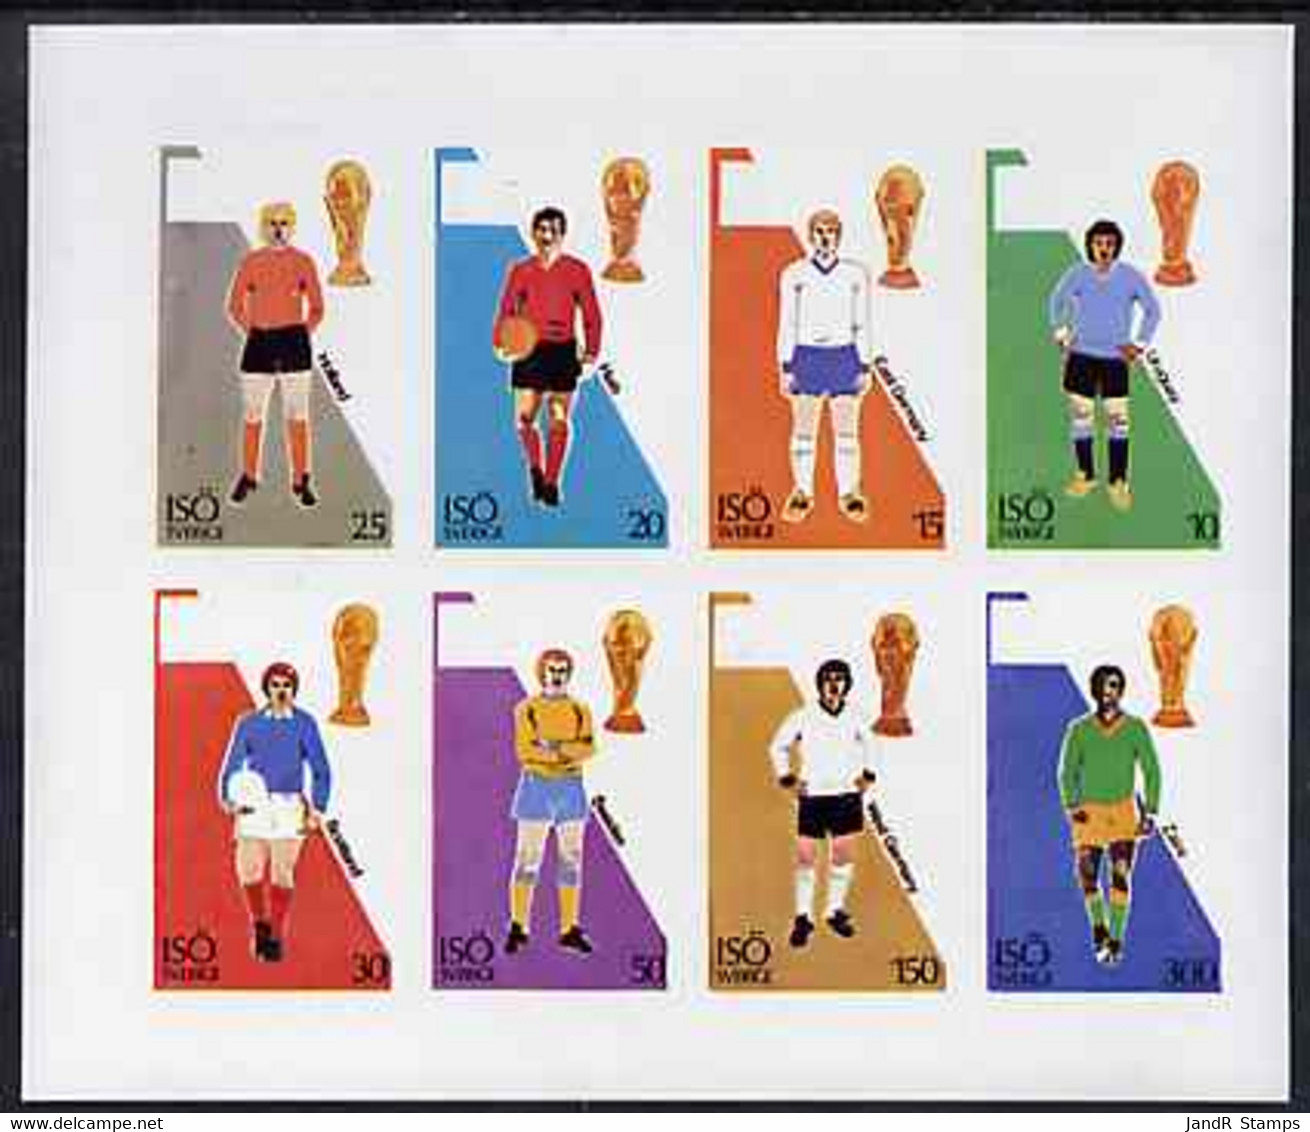 Iso - Sweden 1974? Football World Cup Imperf Sheetlet Containing Set Of 8 Values MNH - Local Post Stamps